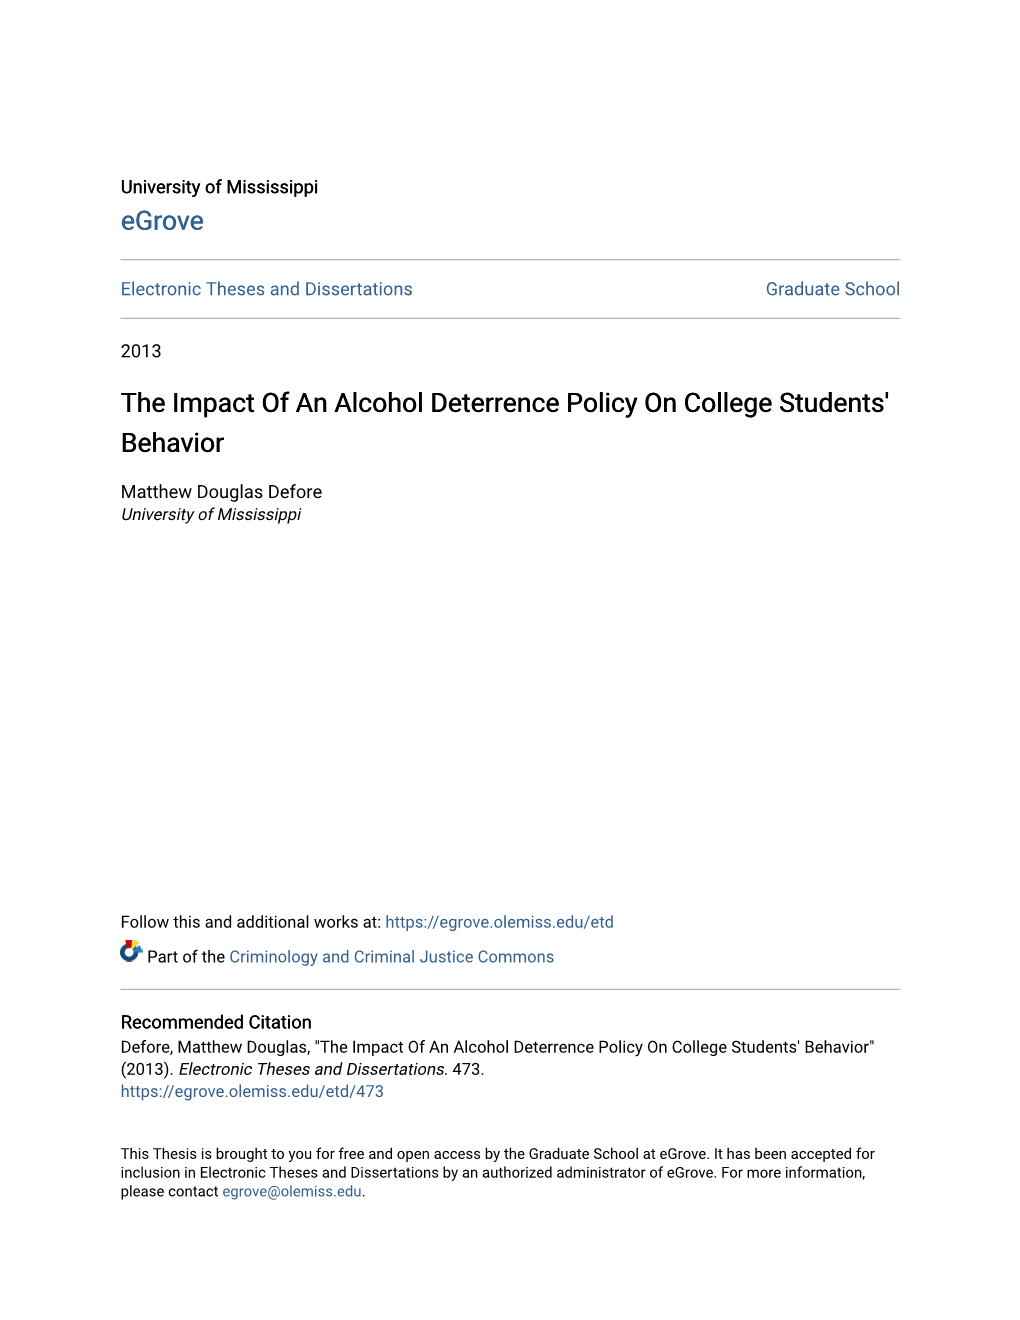 The Impact of an Alcohol Deterrence Policy on College Students' Behavior